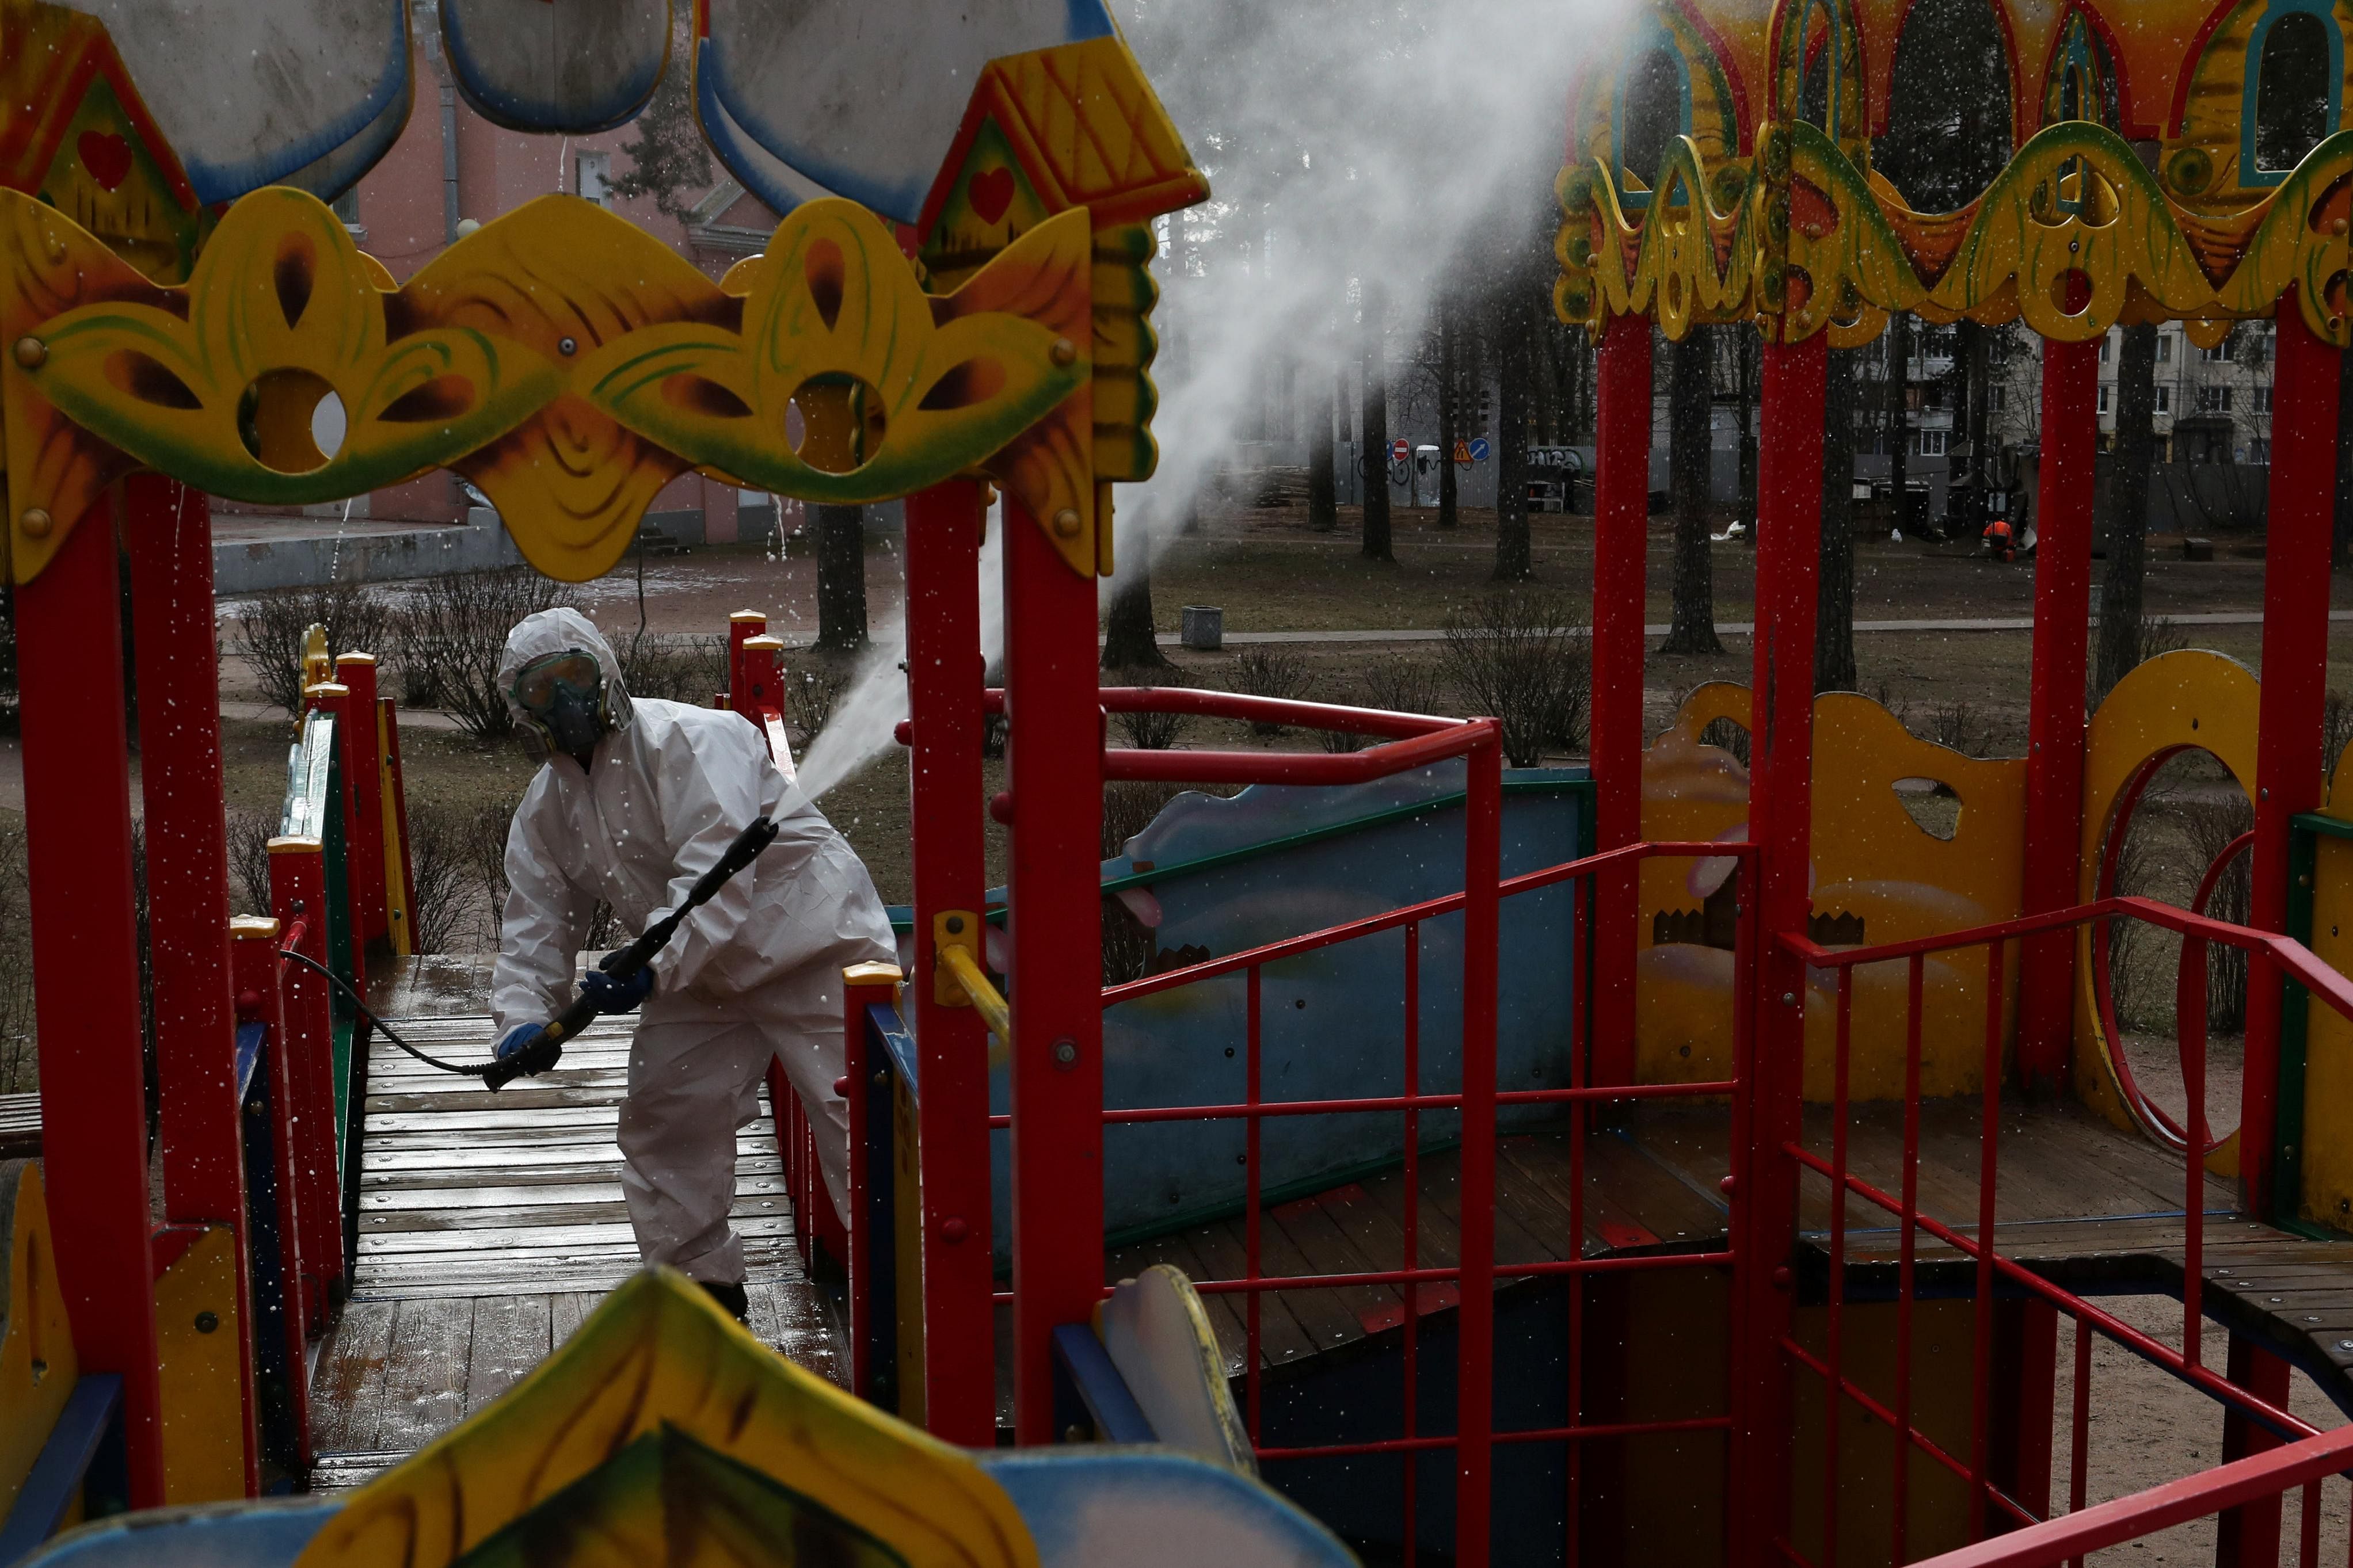 A specialist wearing protective gear sprays disinfectant while sanitizing a playground to prevent the spread of the coronavirus disease (COVID-19) in the town of Vsevolozhsk in Leningrad Region, Russia. (Credit: Reuters)